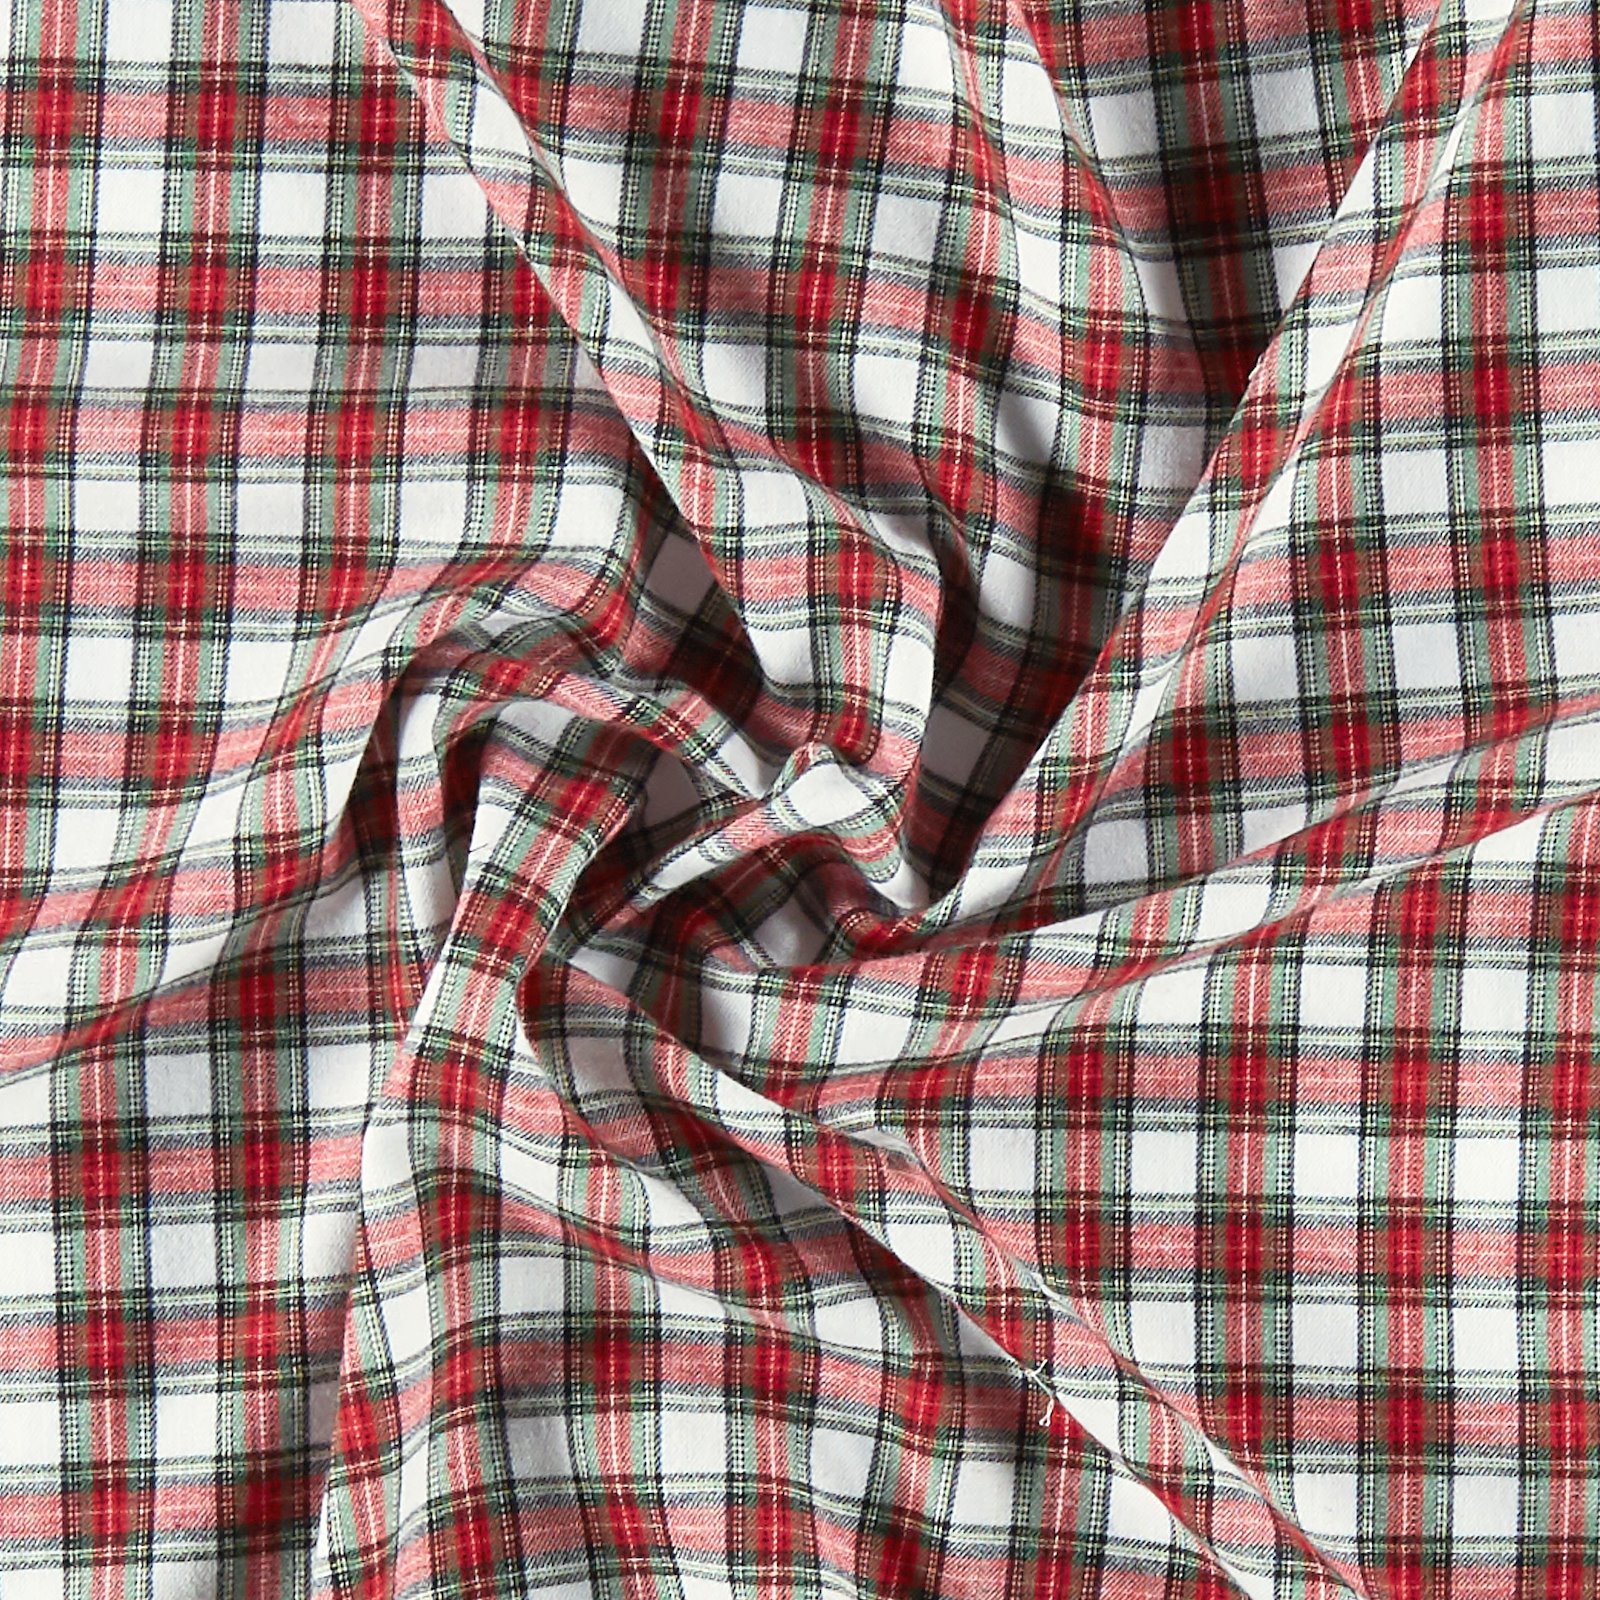 Woven cotton nature/red/green YD check 500313_pack